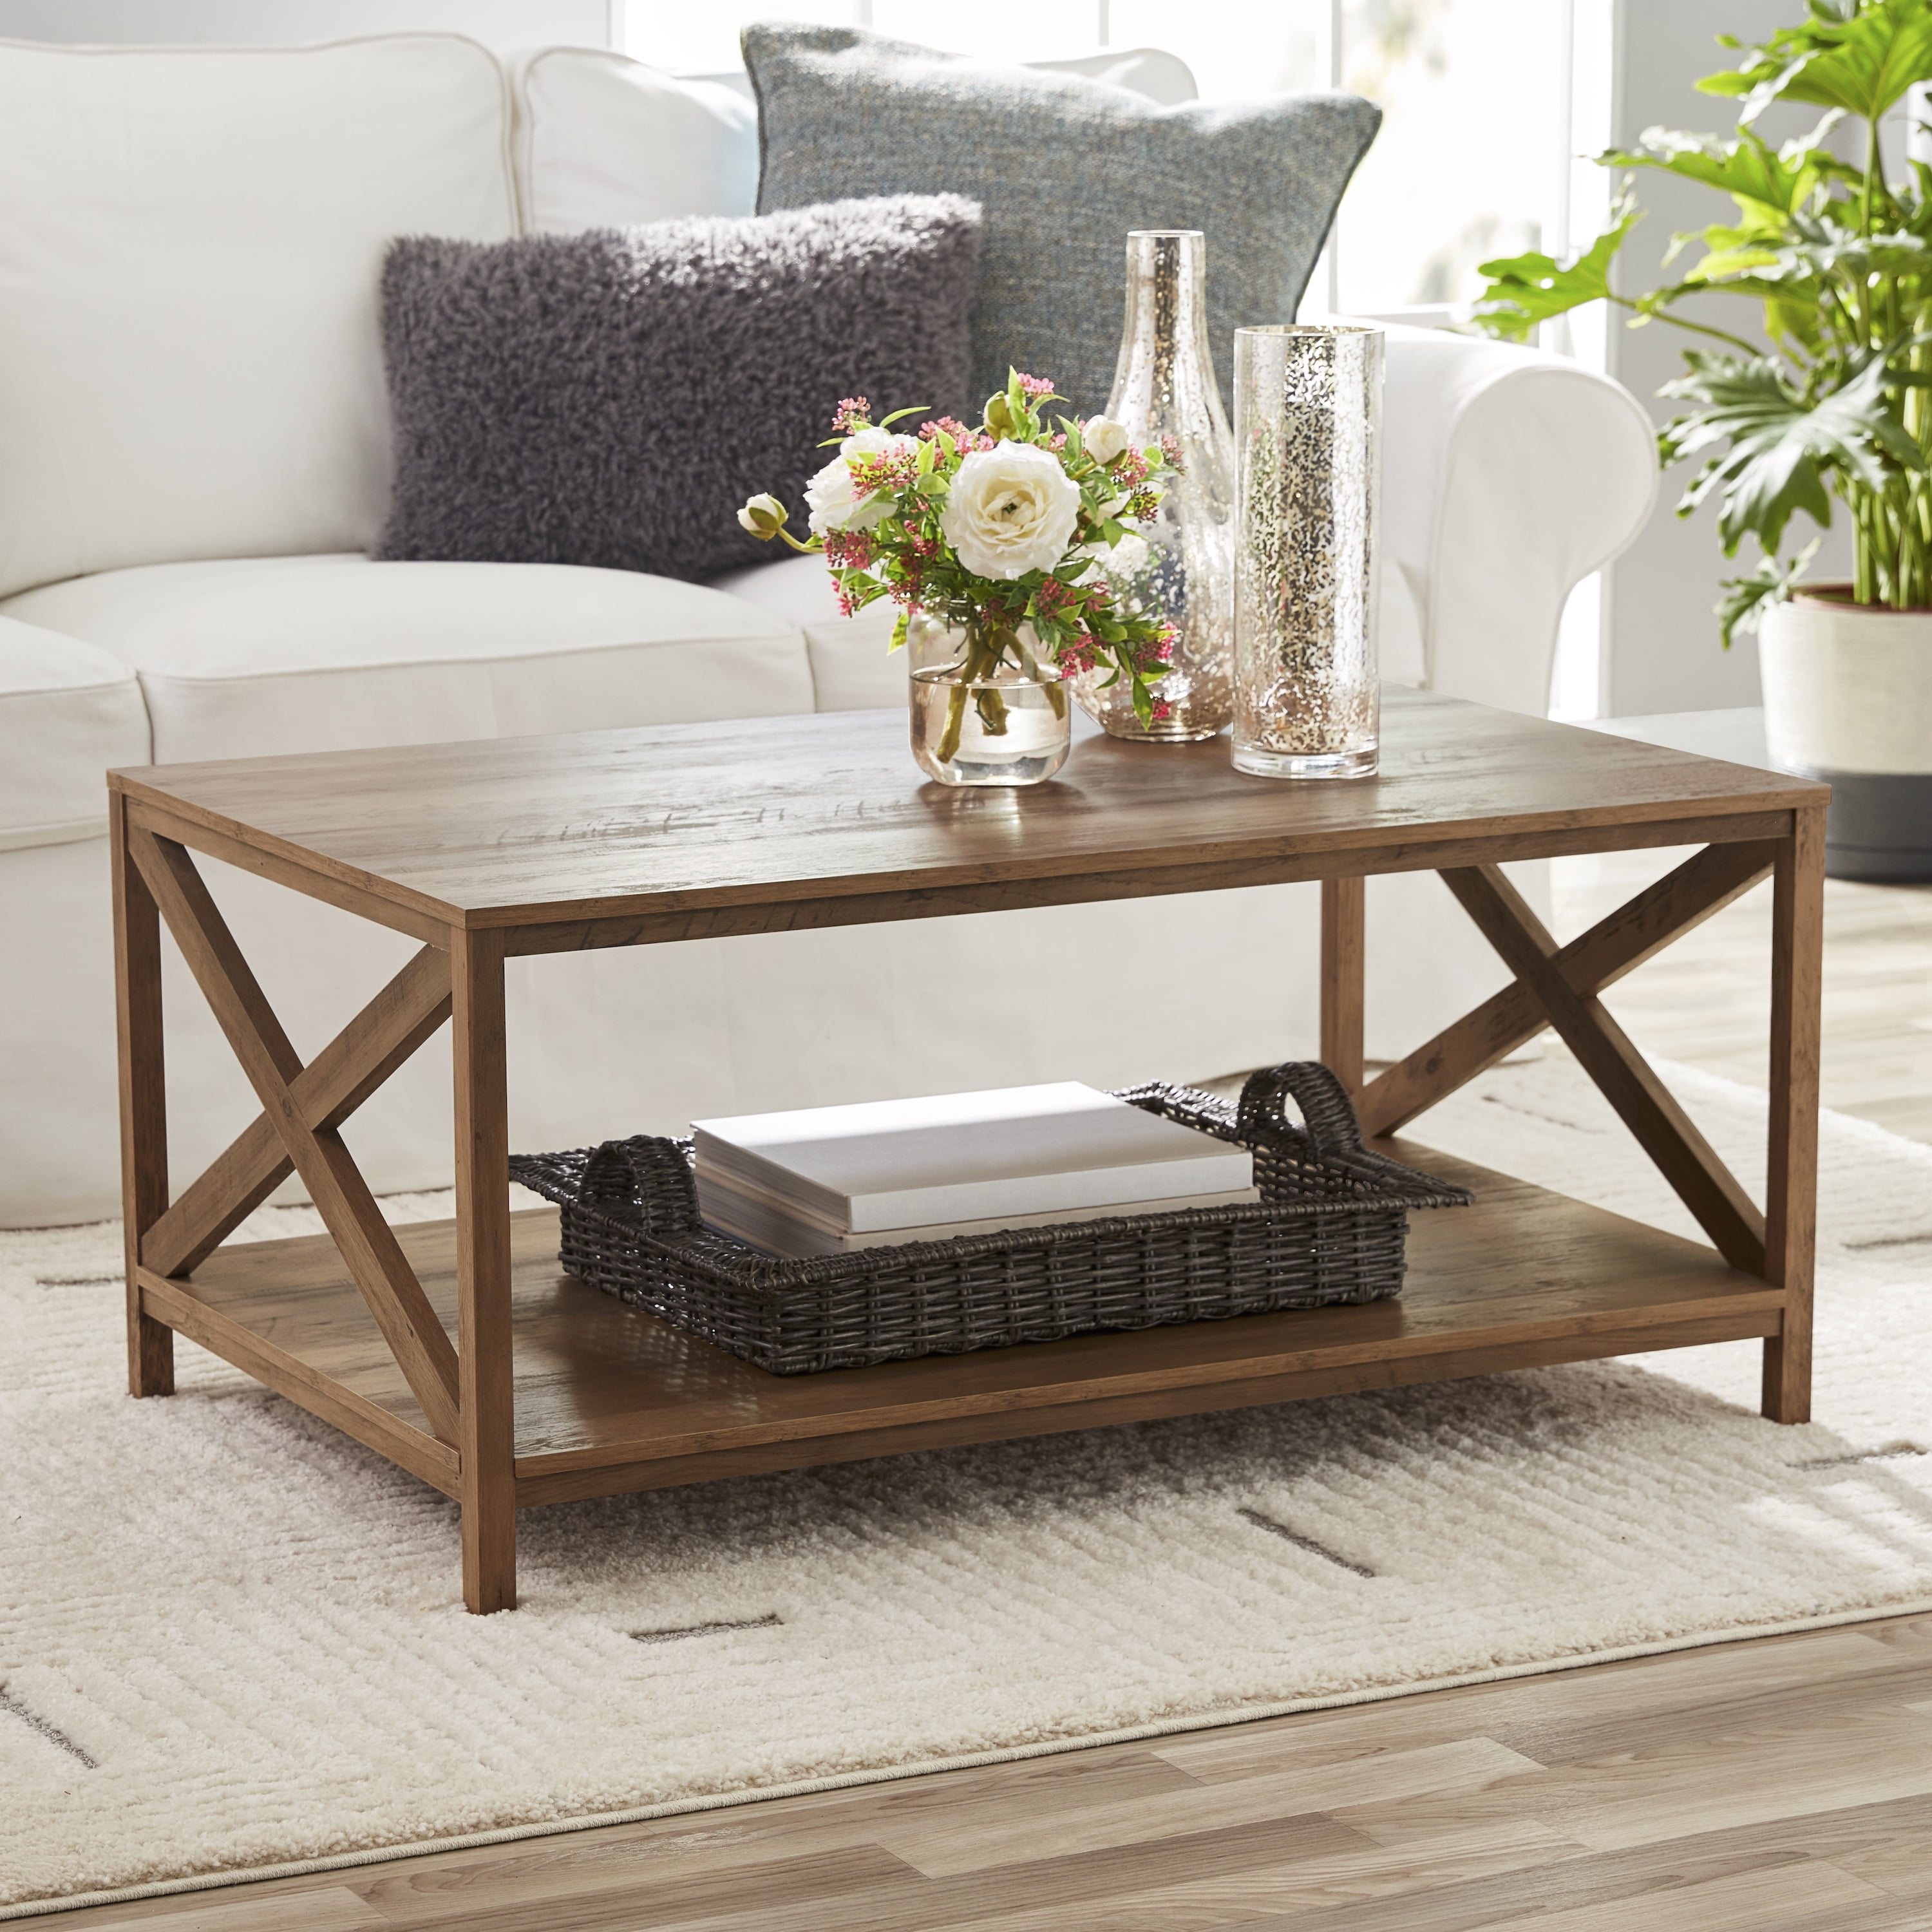 Mainstays Farmhouse X Design Rectangle Coffee Table with Storage, Rustic Weathered Oak